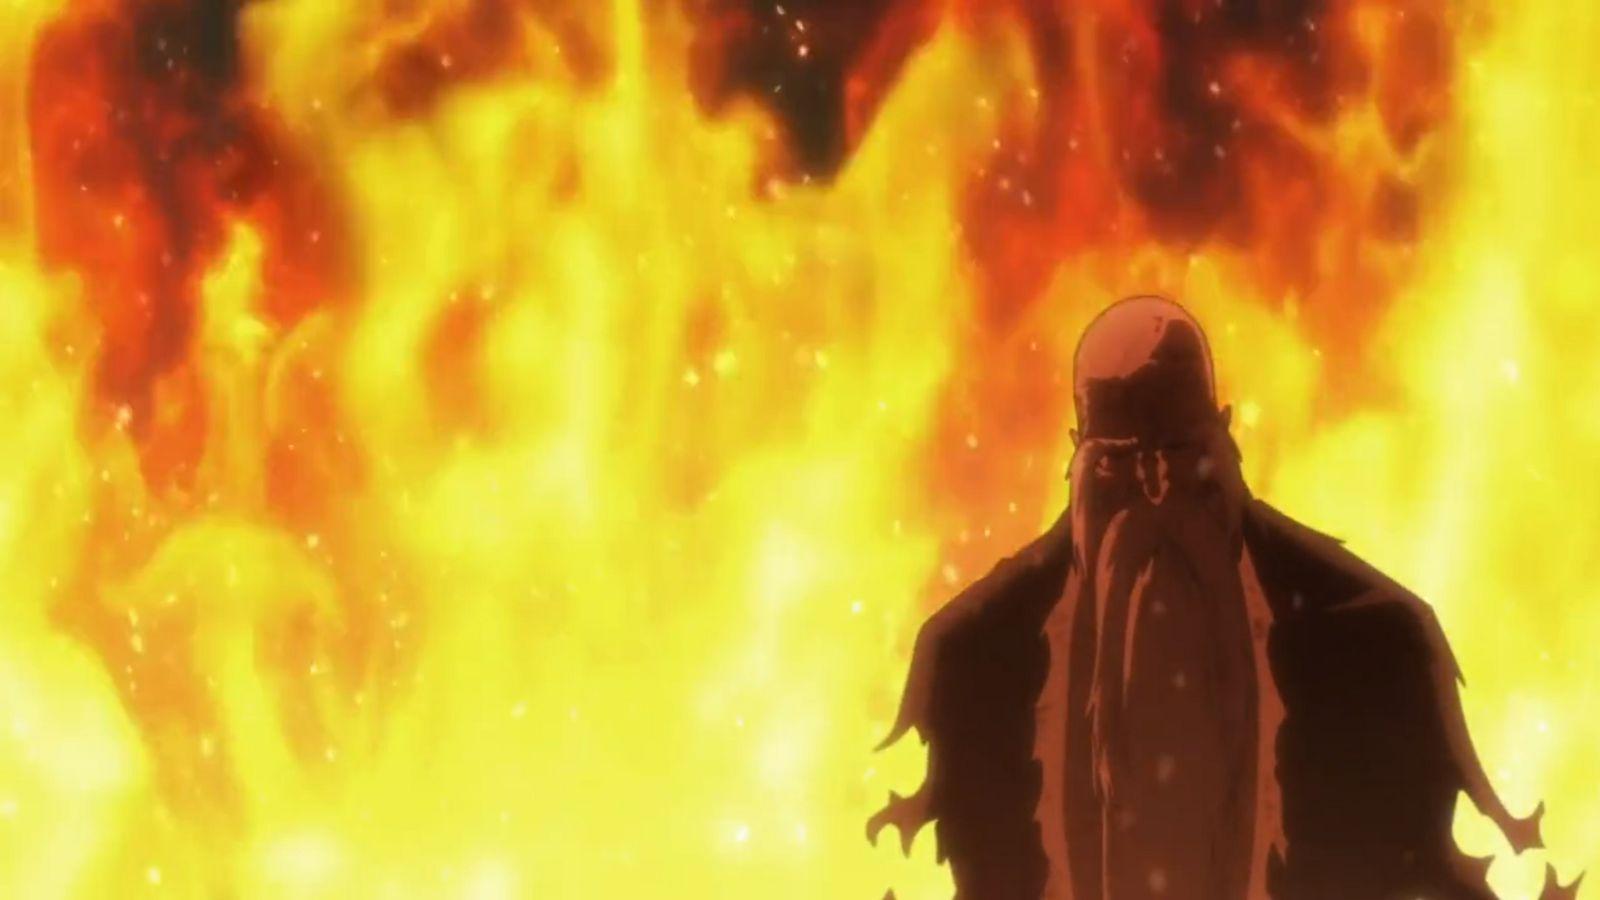 Fire Force Season One, Episode One: Explosive Anime Action When